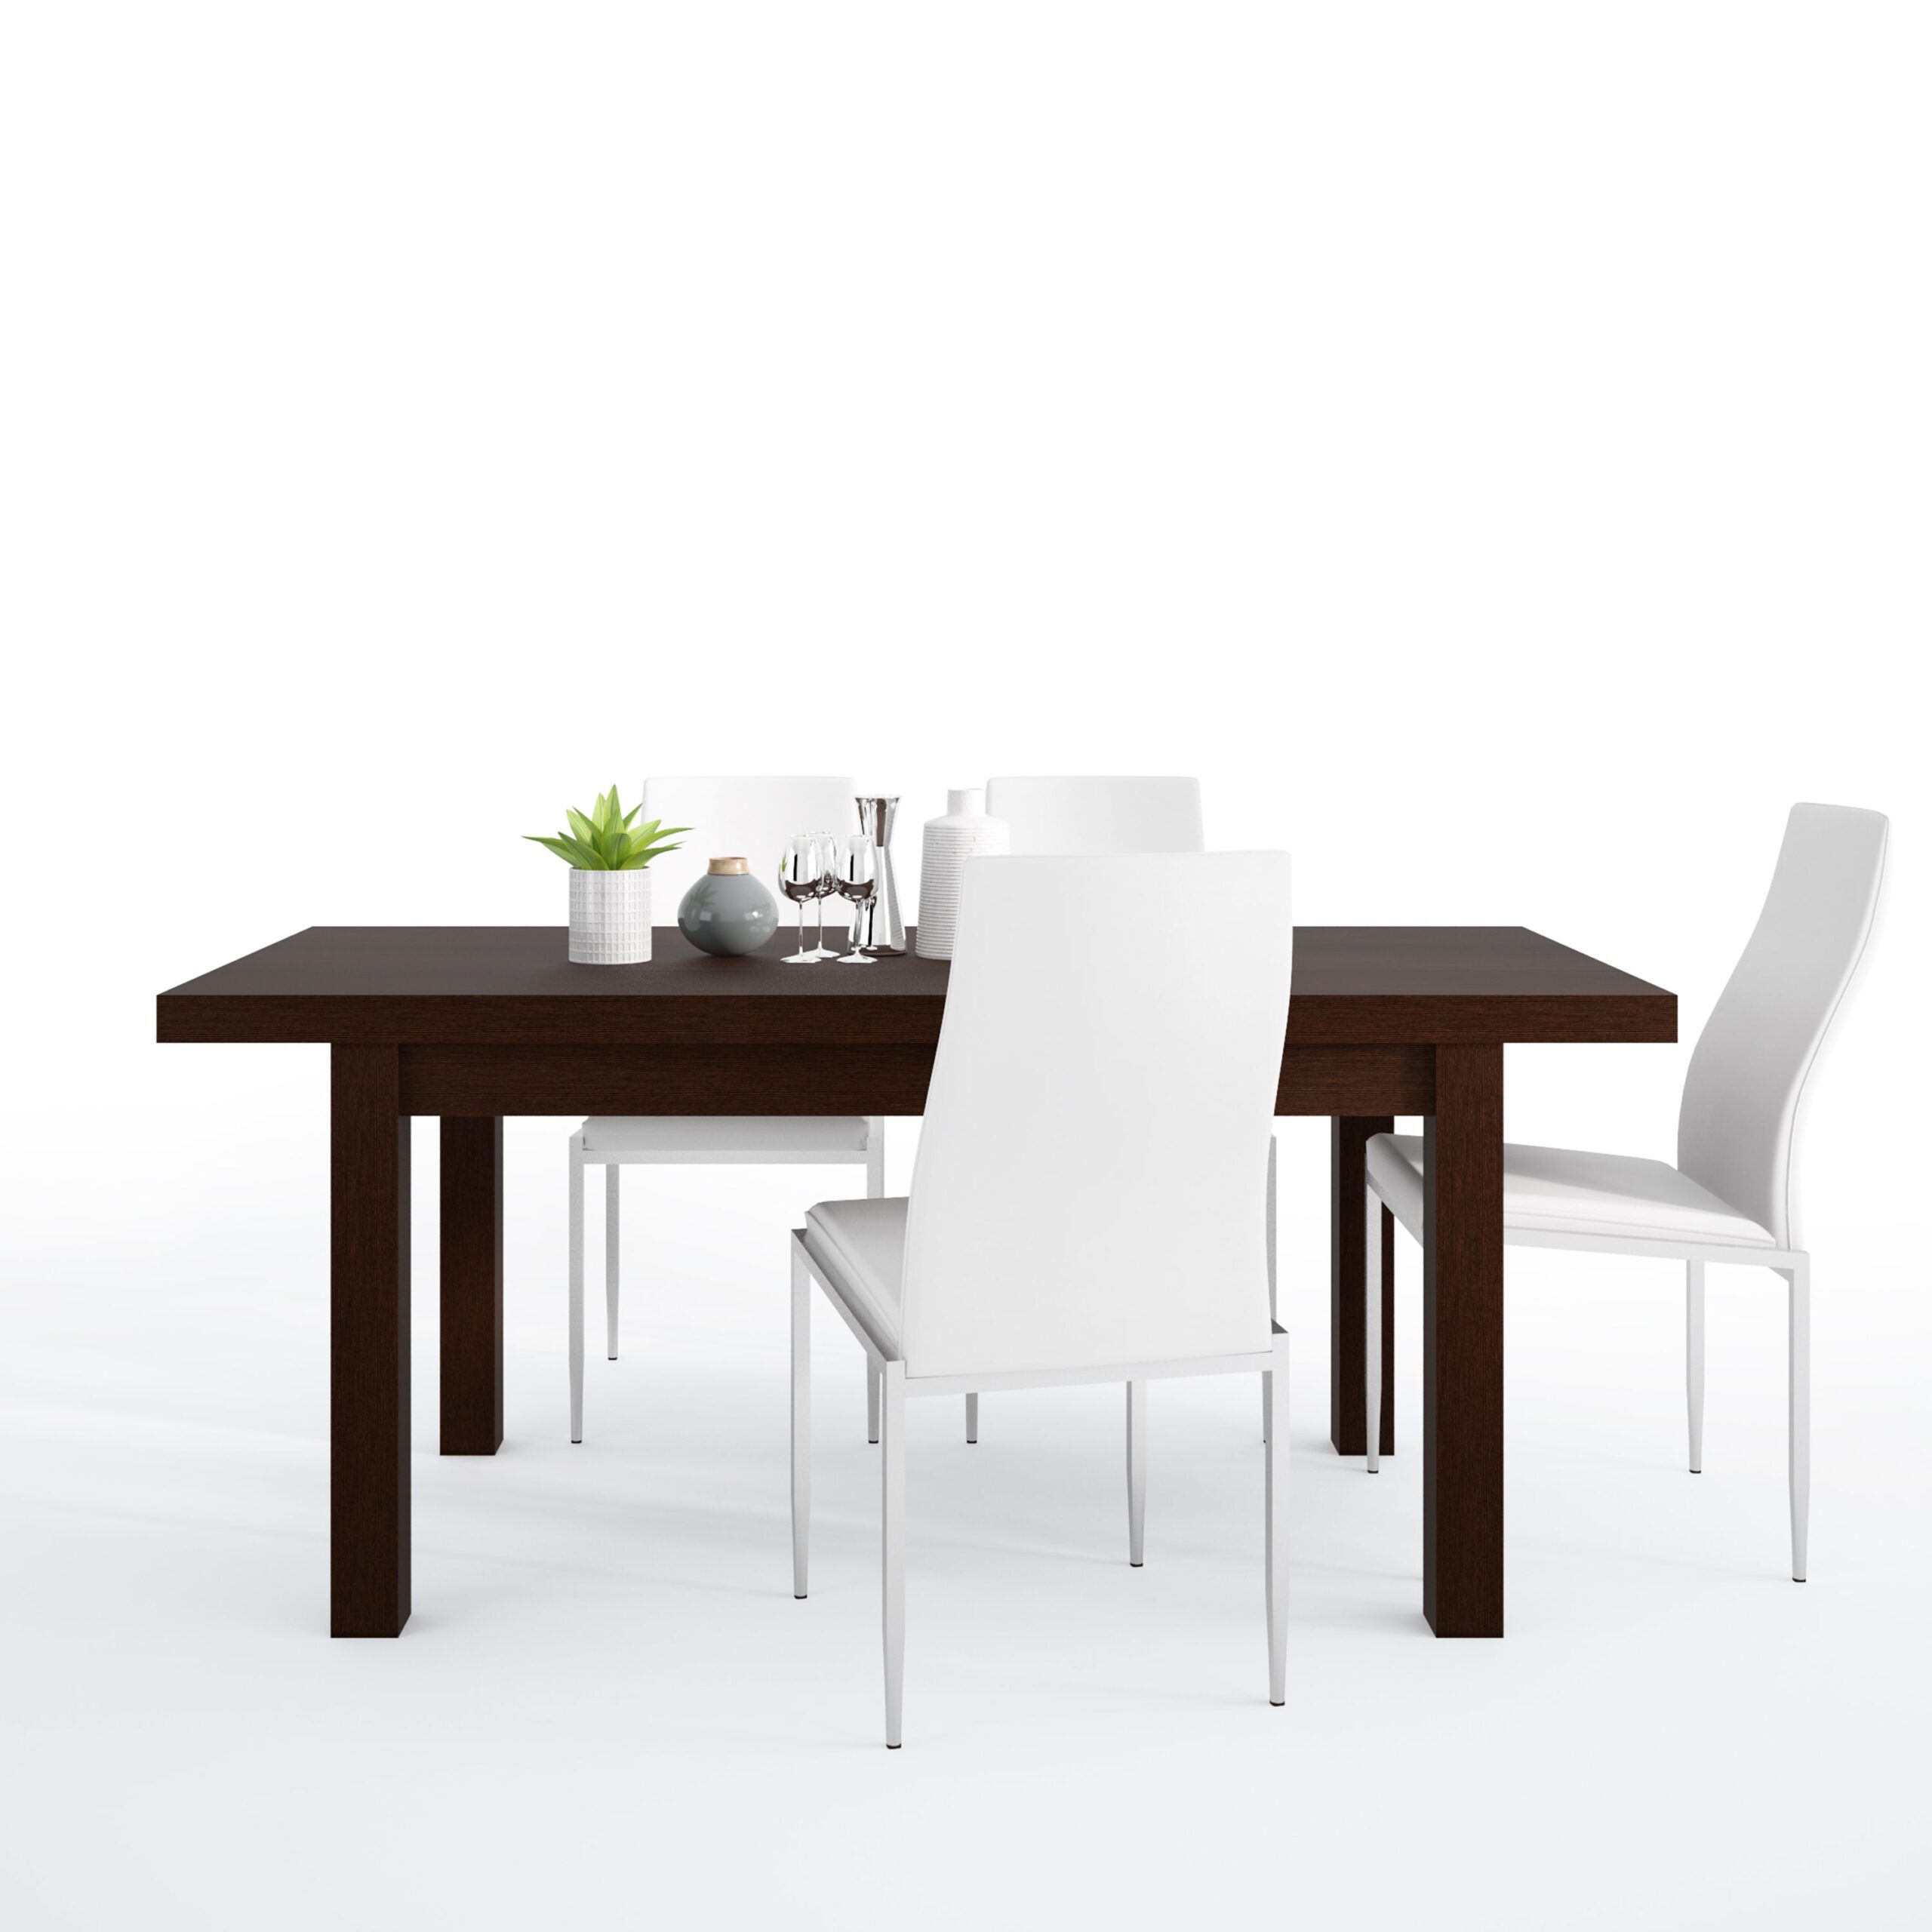 Jello Dining set package Jello Extending Dining Table in Dark Mahogany + 6 Lillie High Back Chair White